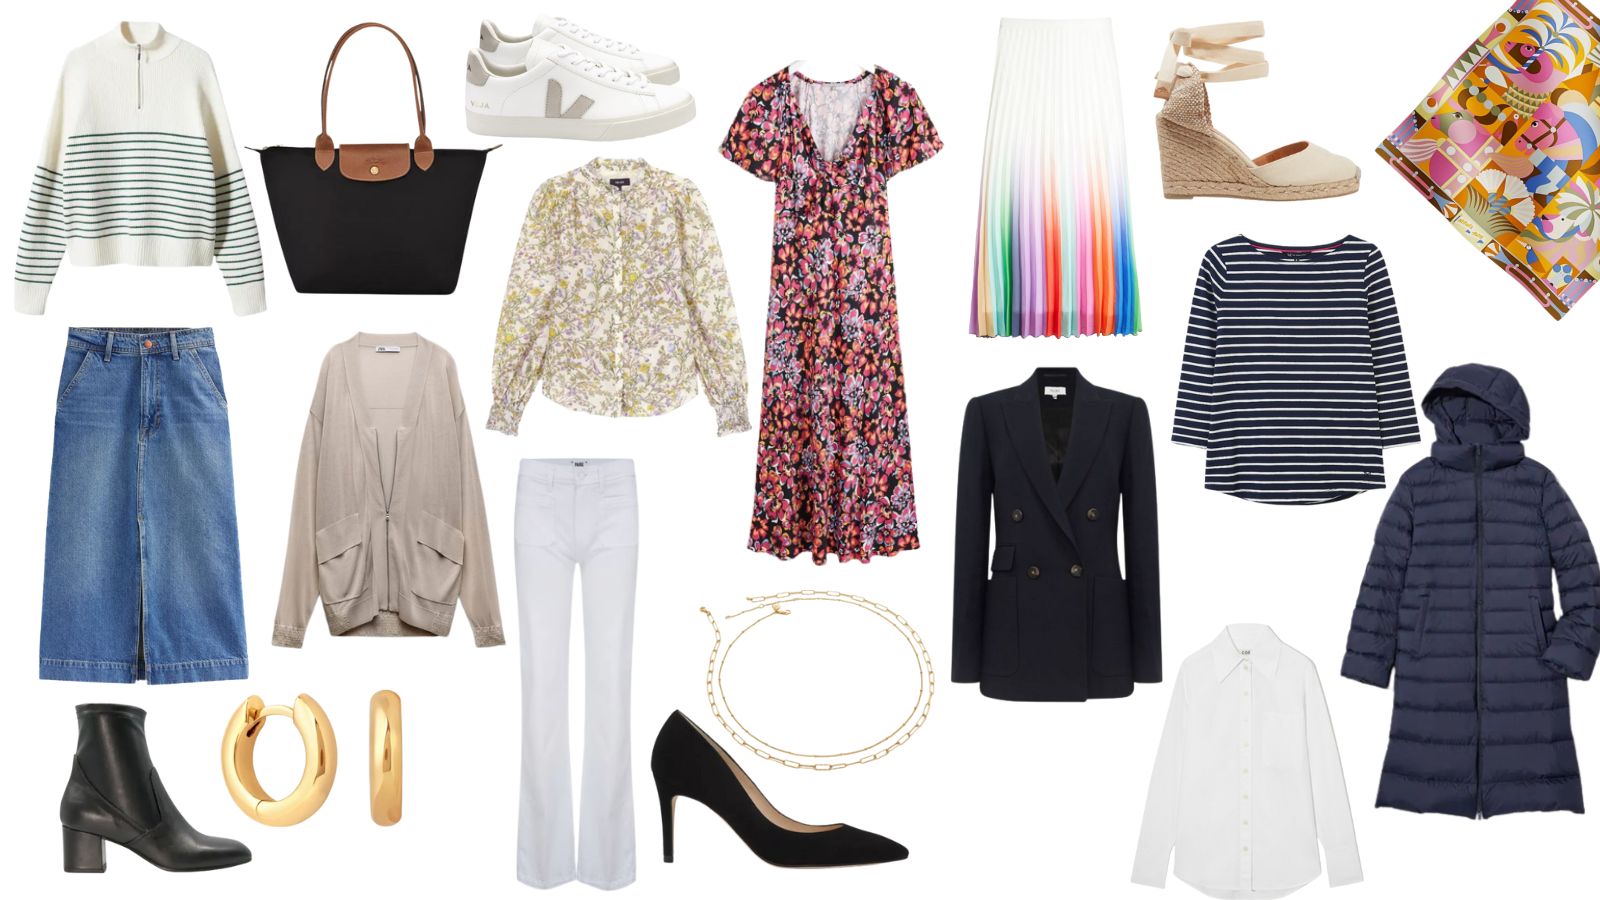 THE Wardrobe Essentials For An Elevated Summer Capsule Wardrobe